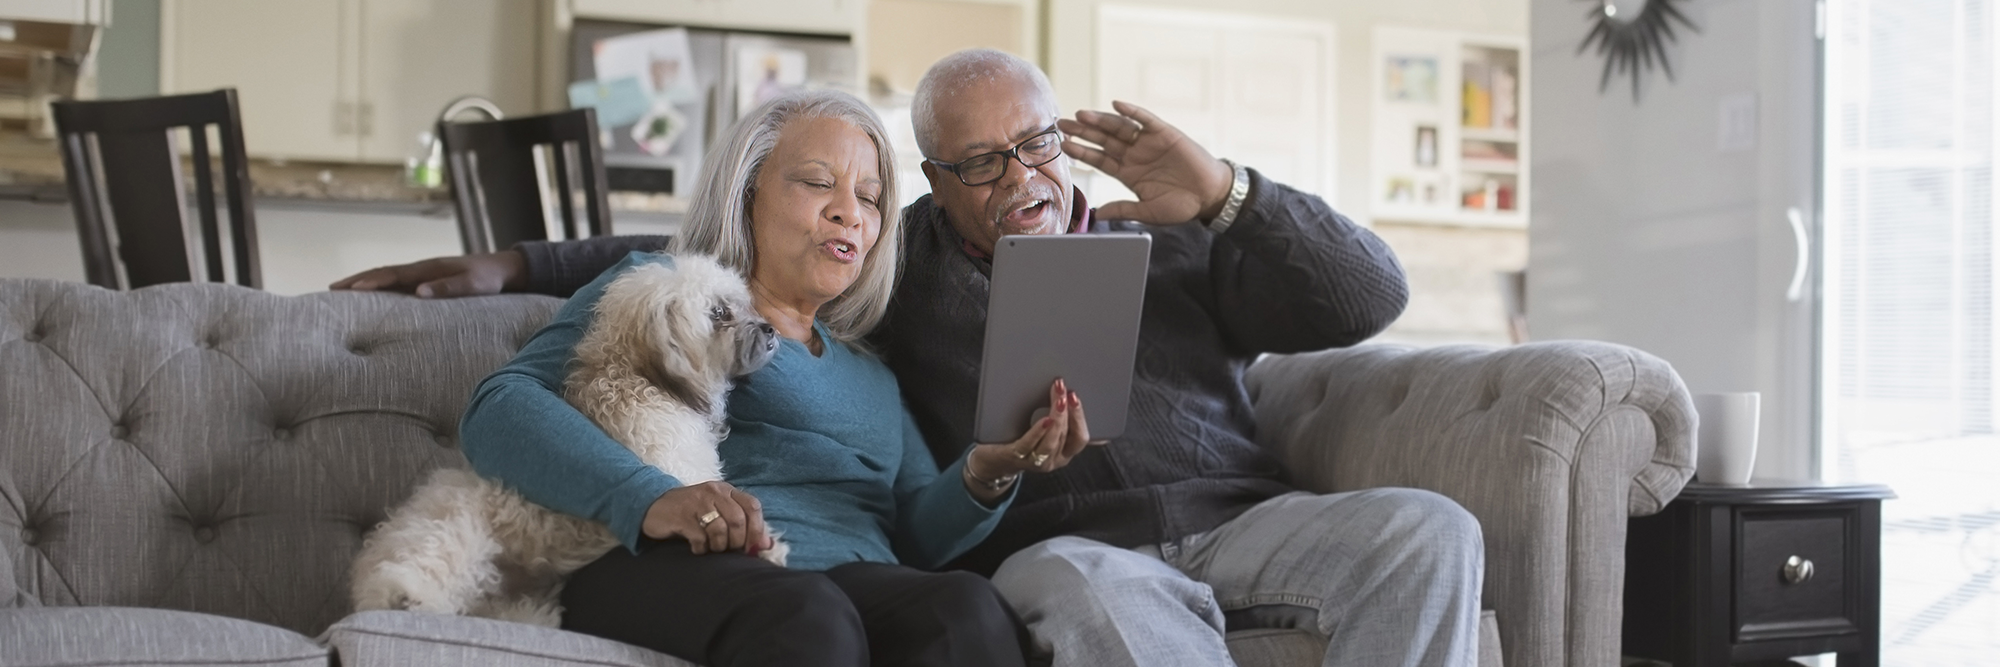 an older man and woman sitting on the sofa with a dog. They are having a video chat with someone on their tablet.